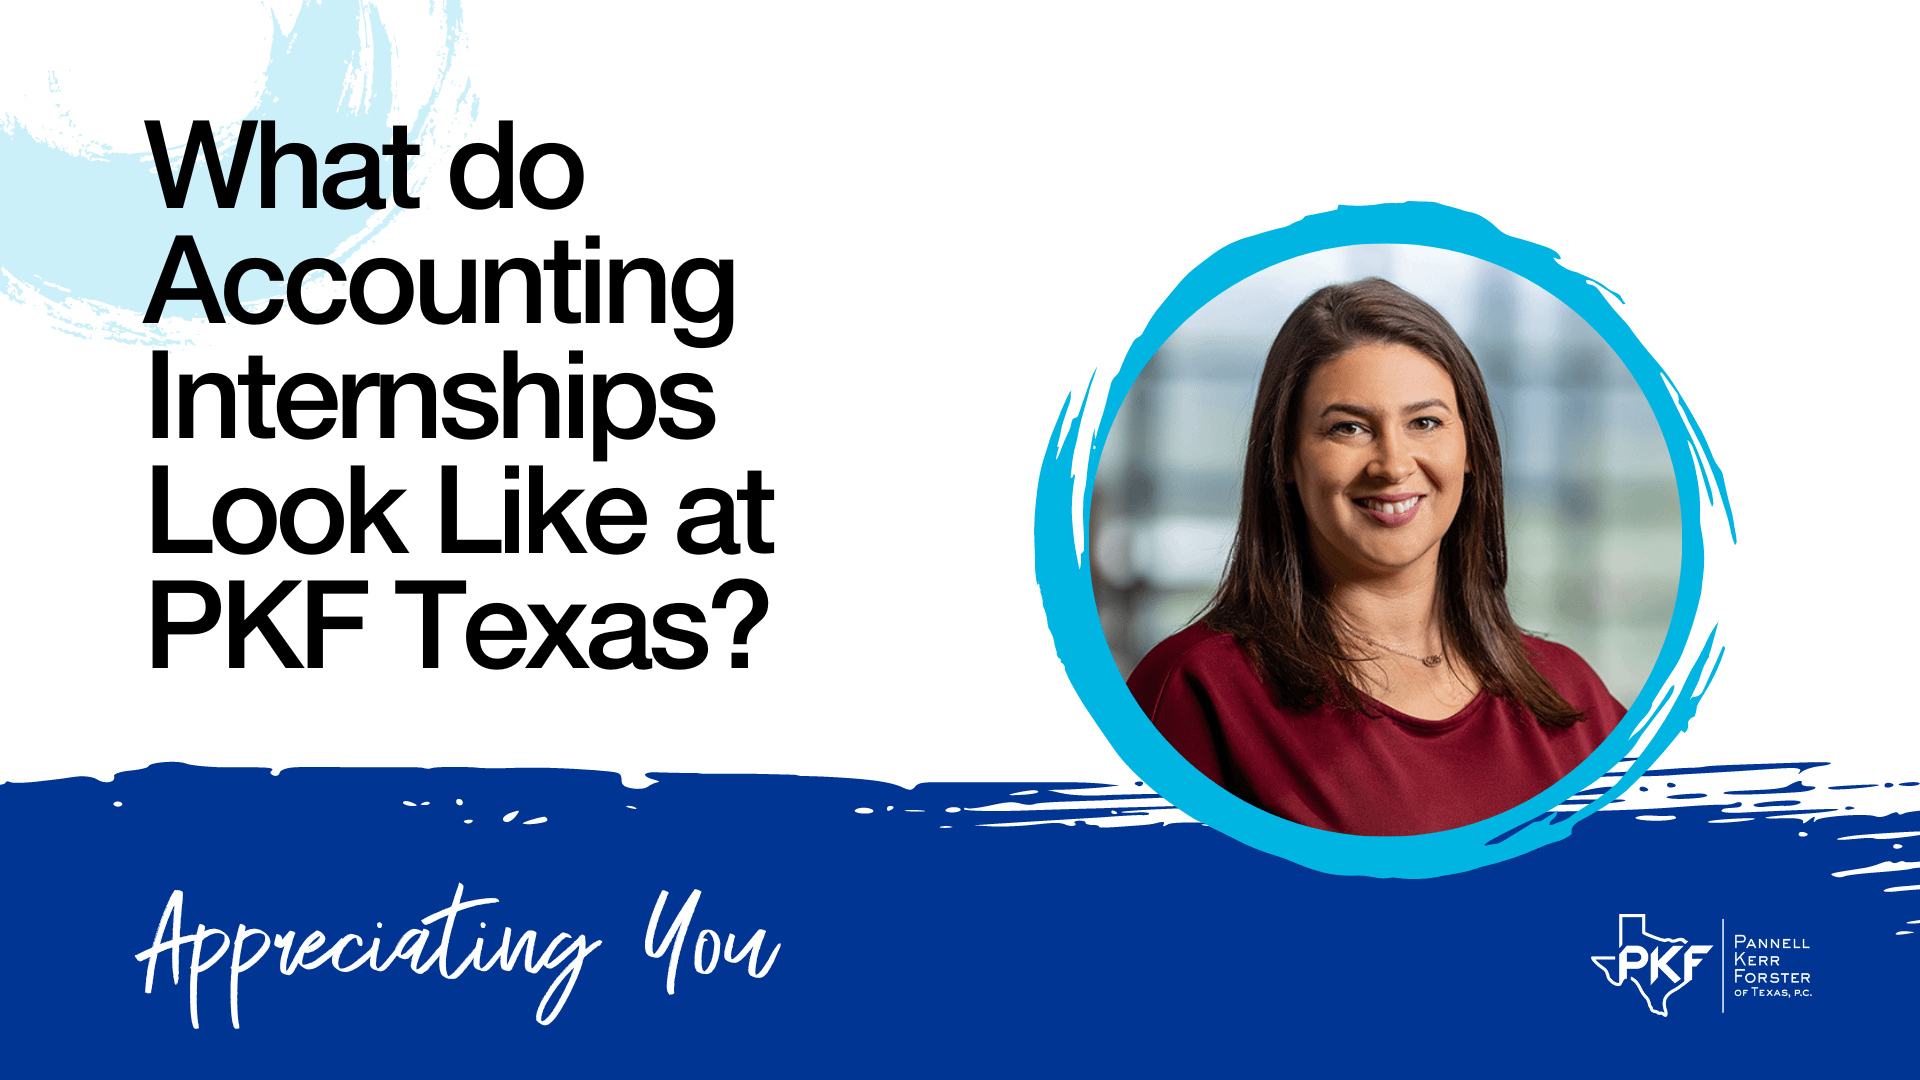 A video thumbnail image for "What Do Accounting Internships Look Like at PKF Texas?" featuring Emily Marsh